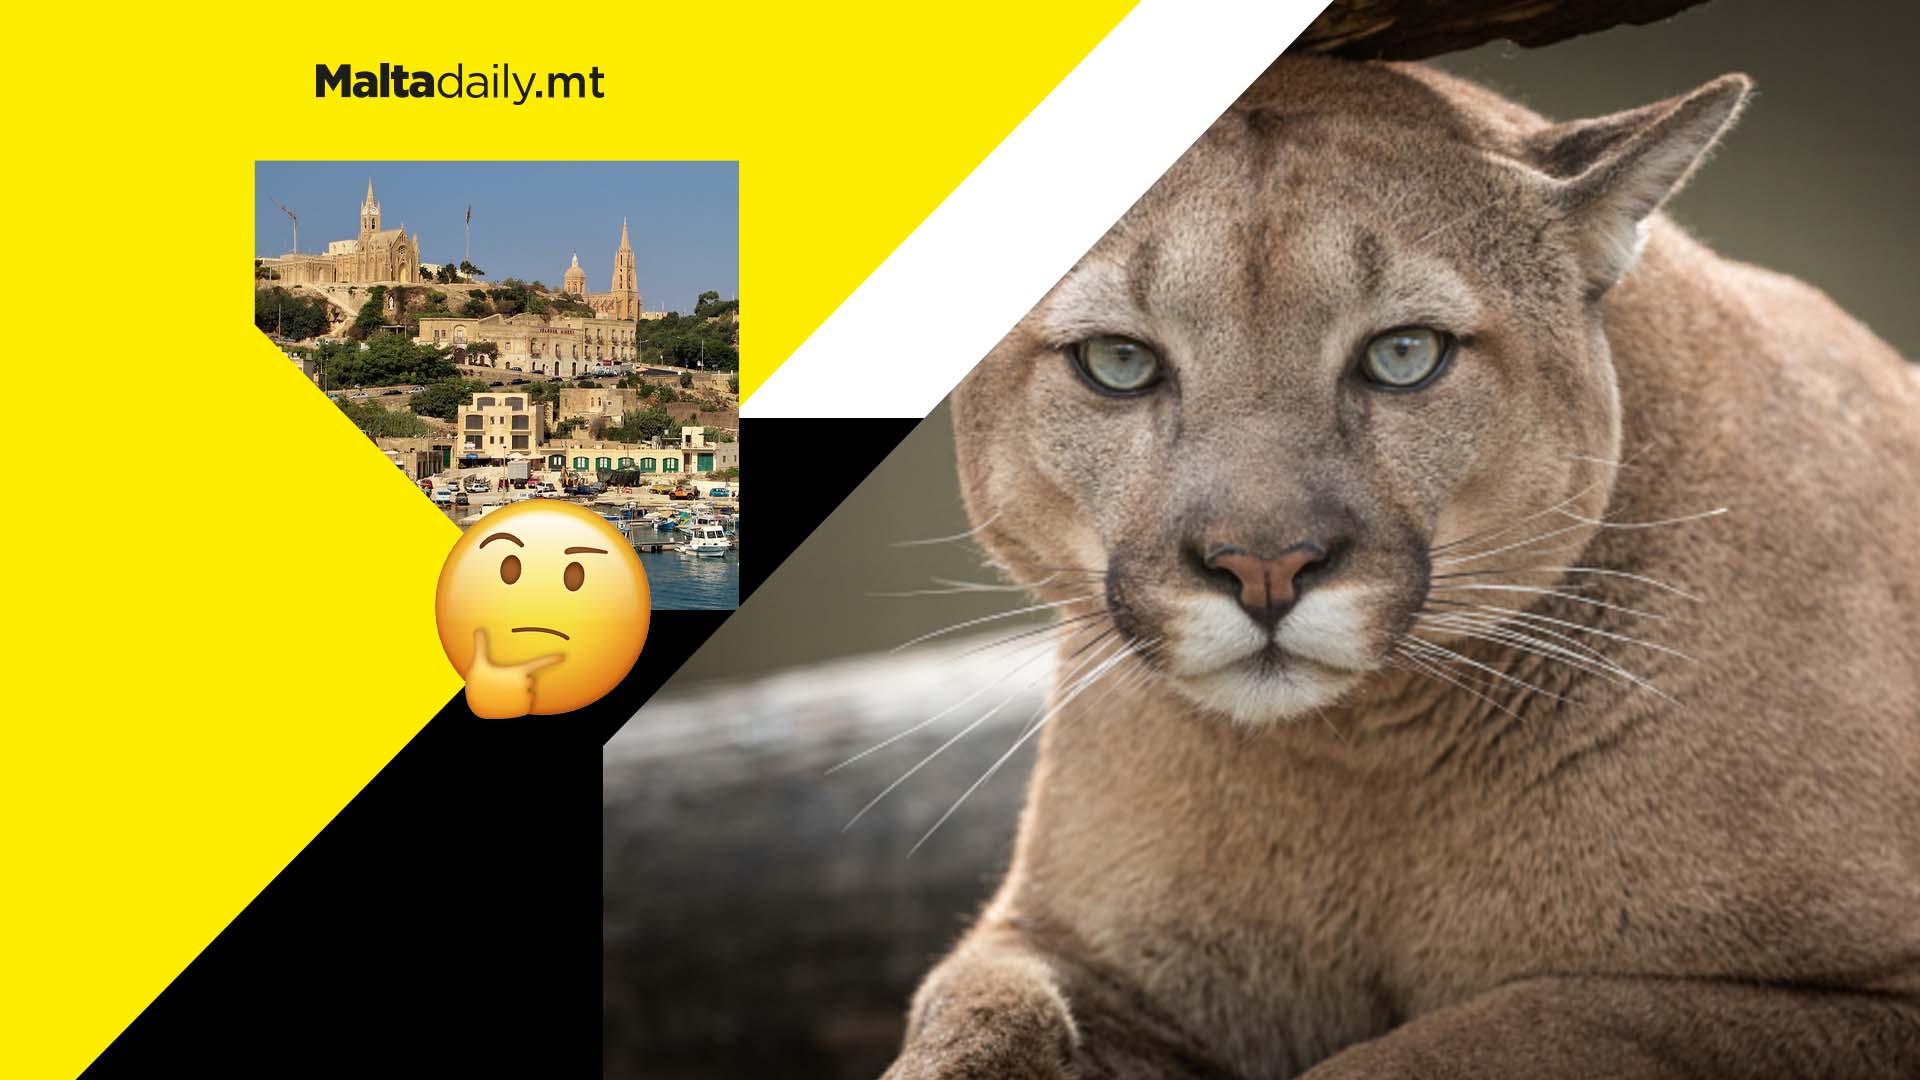 Impossible to know how many big cats are in Malta